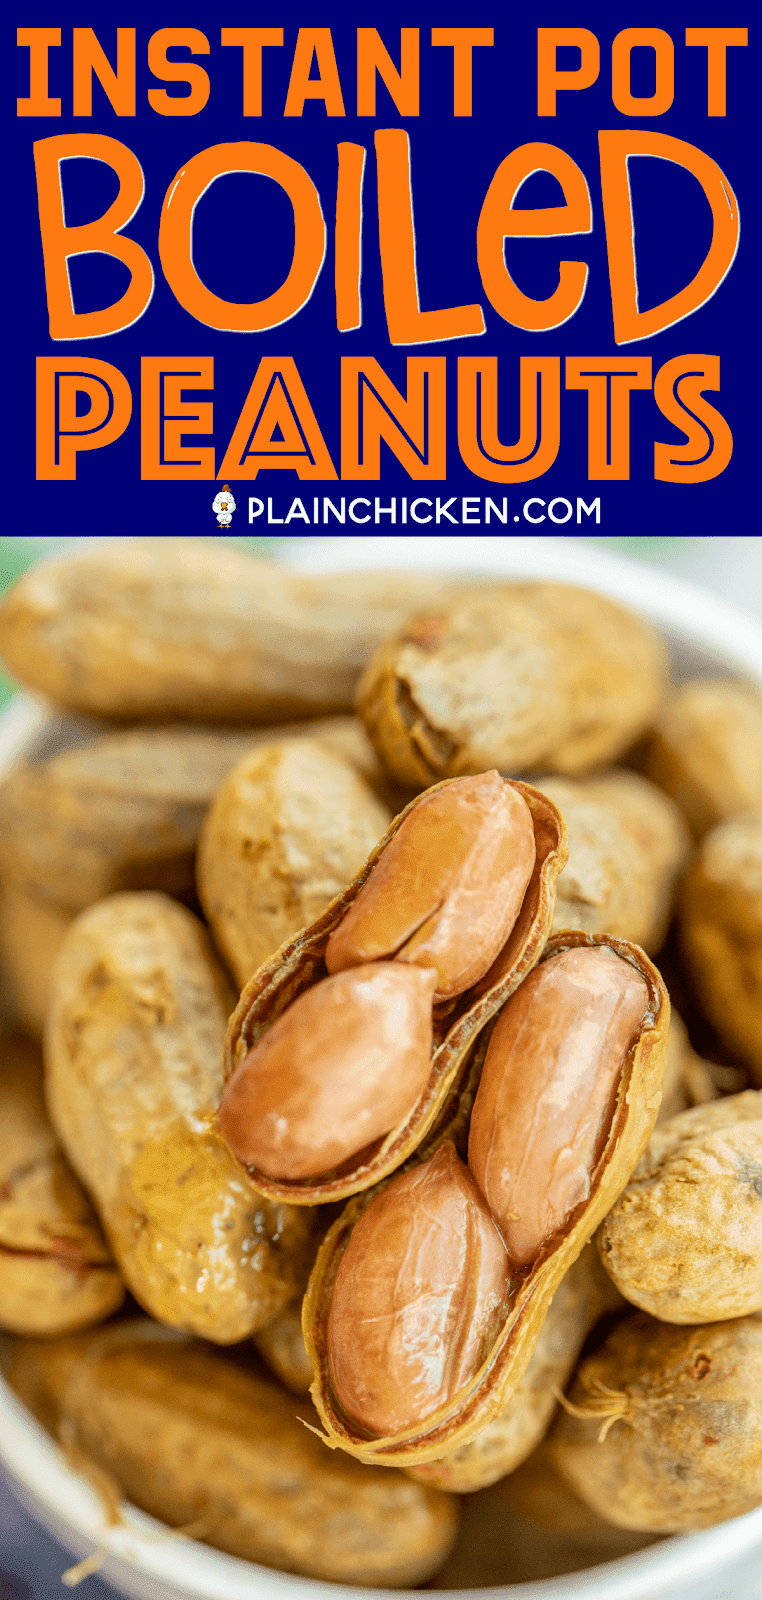 Instant Pot Boiled Peanuts - ready to eat in under an hour!! We love these boiled peanuts for tailgating. SO easy to make! Season with cajun seasoning, old bay or salt. Store leftovers in the refrigerator for up to 10 days. #instantpot #tailgating #peanuts #boiledpeanuts